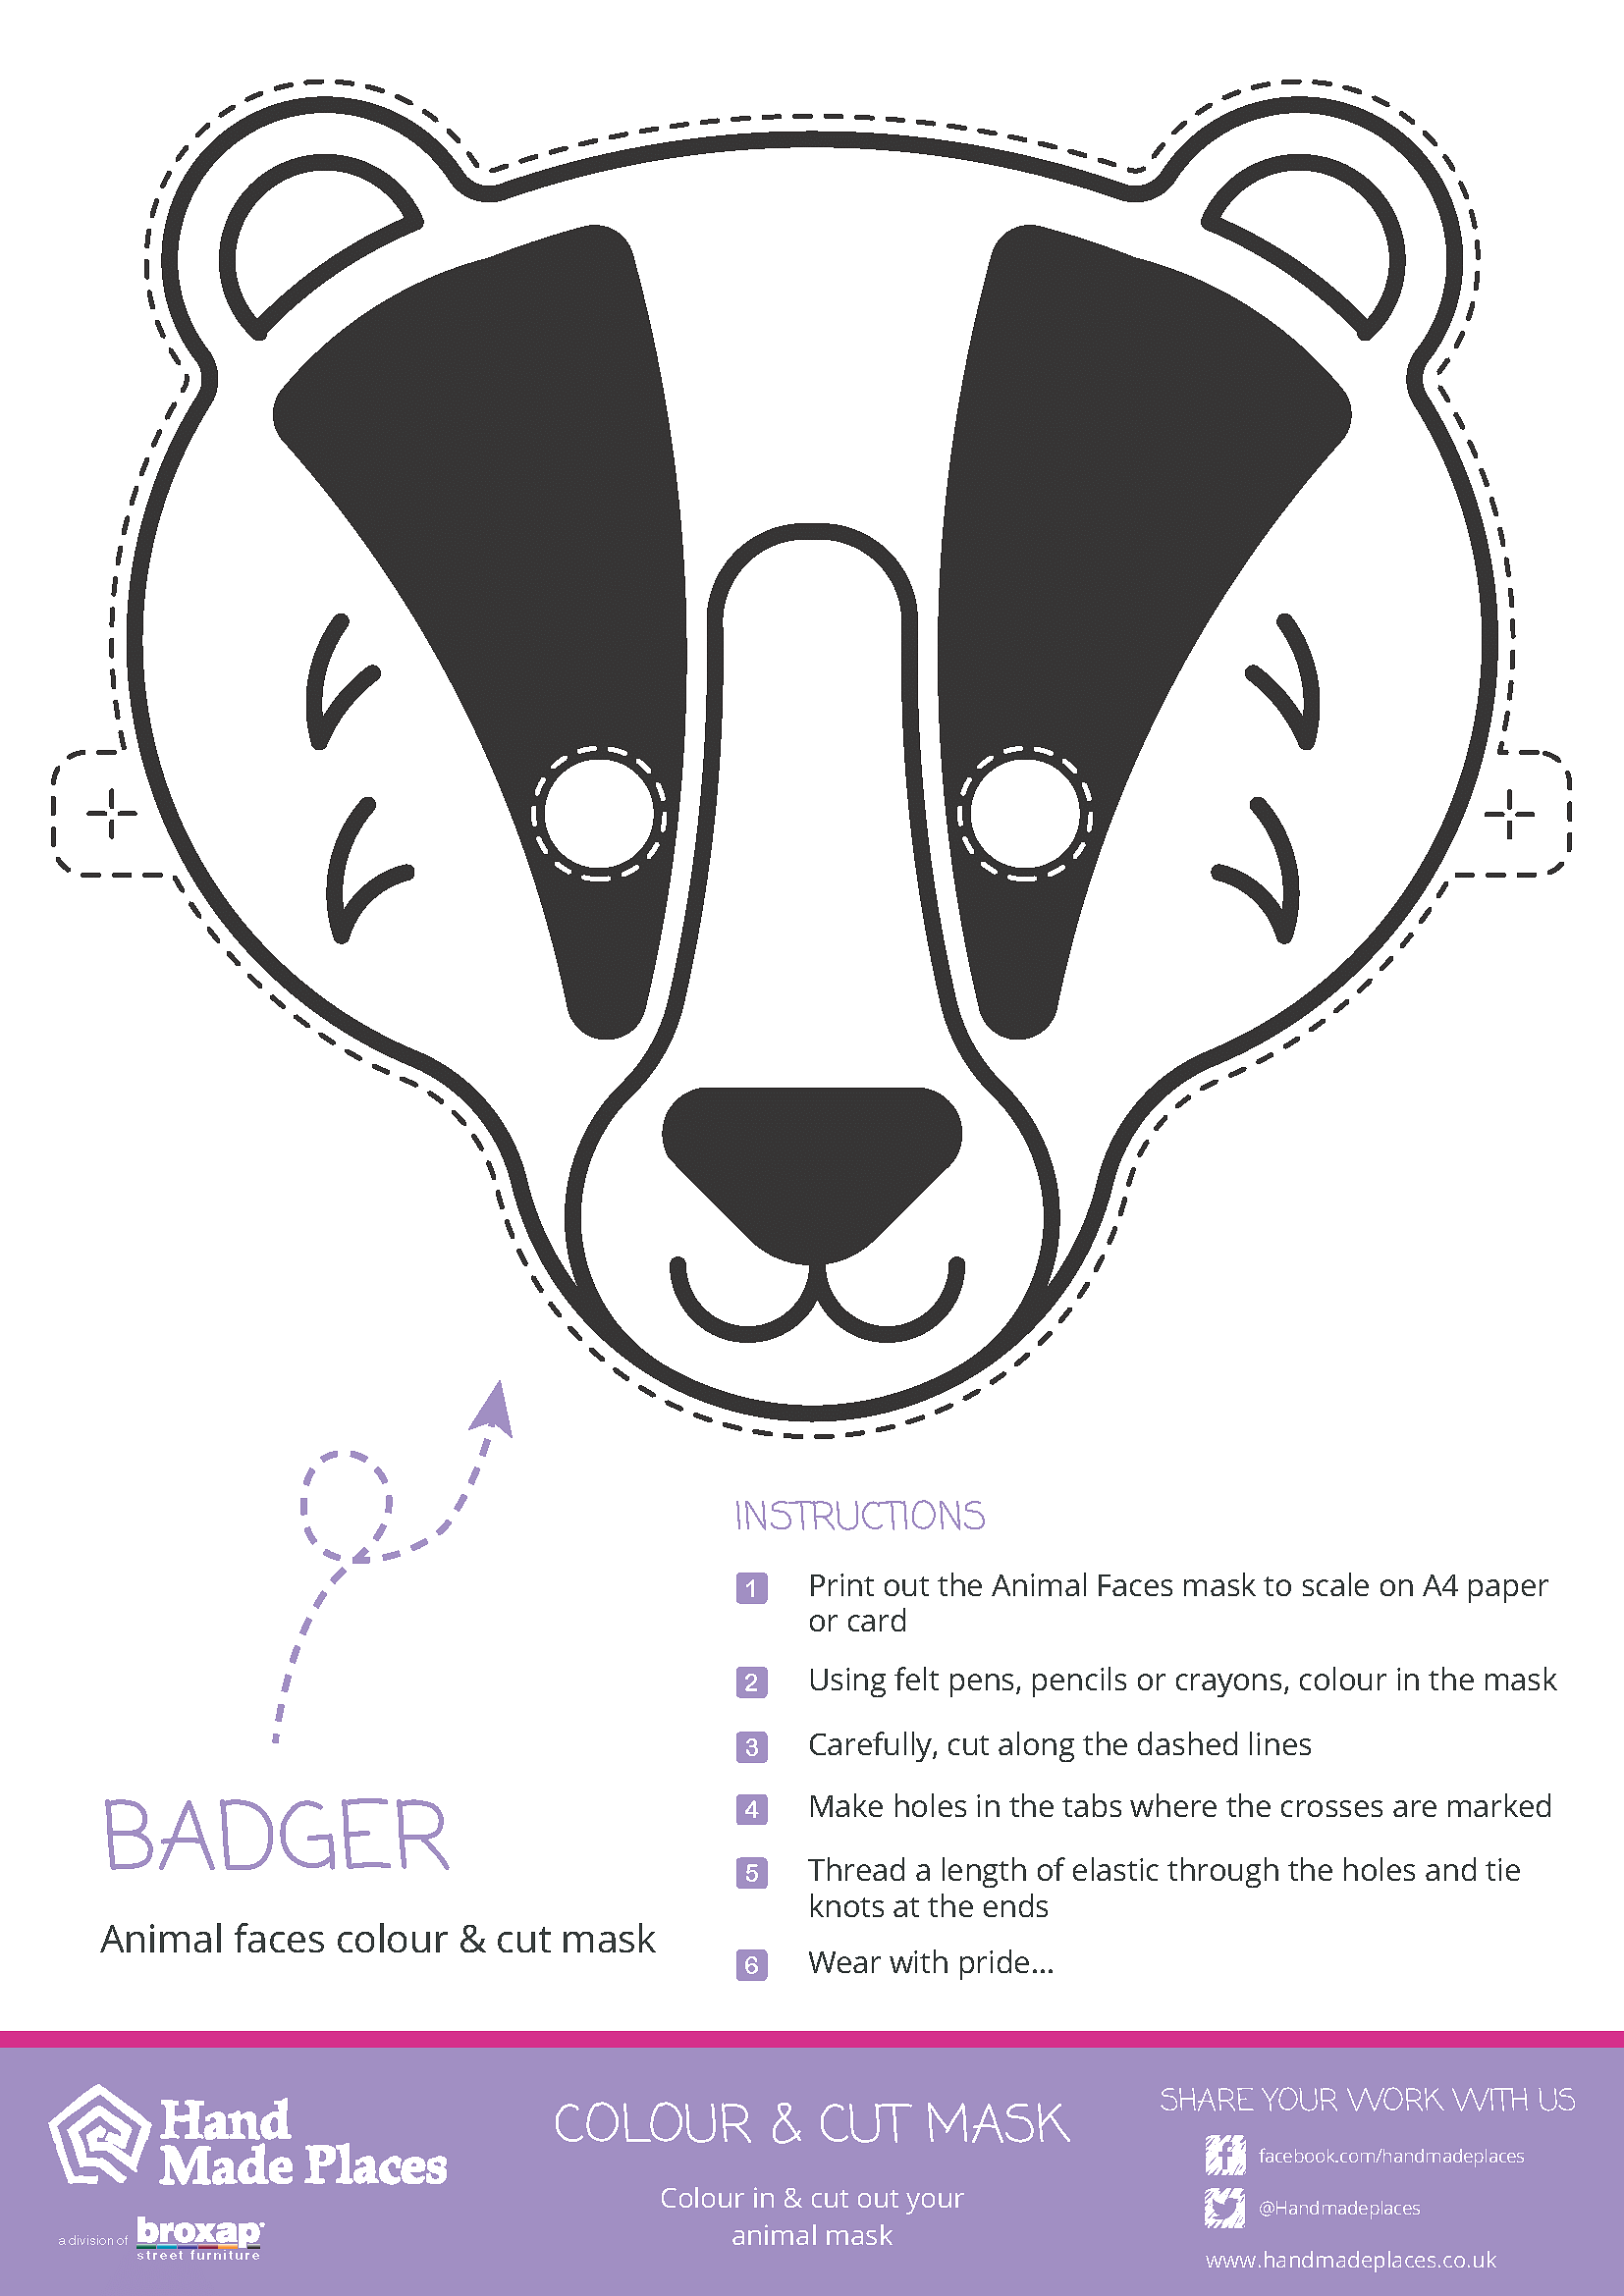 Badger Mask Colour and Cut